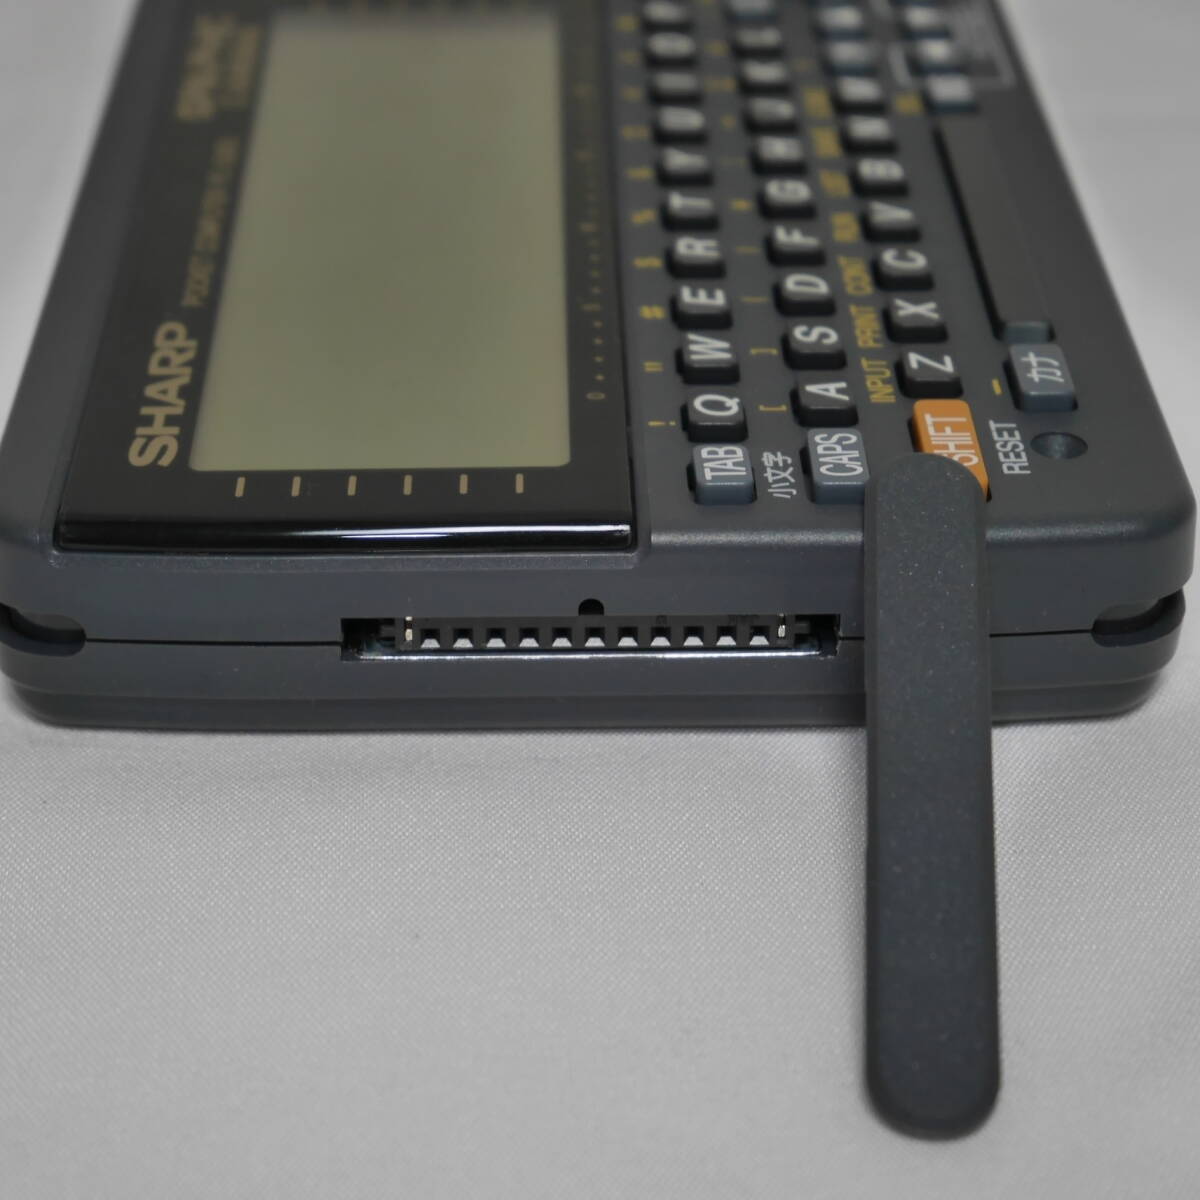  free shipping new goods unused PC-G850 pocket computer scientific calculator SHARP instructions attaching school education exclusive use machine rare rare 